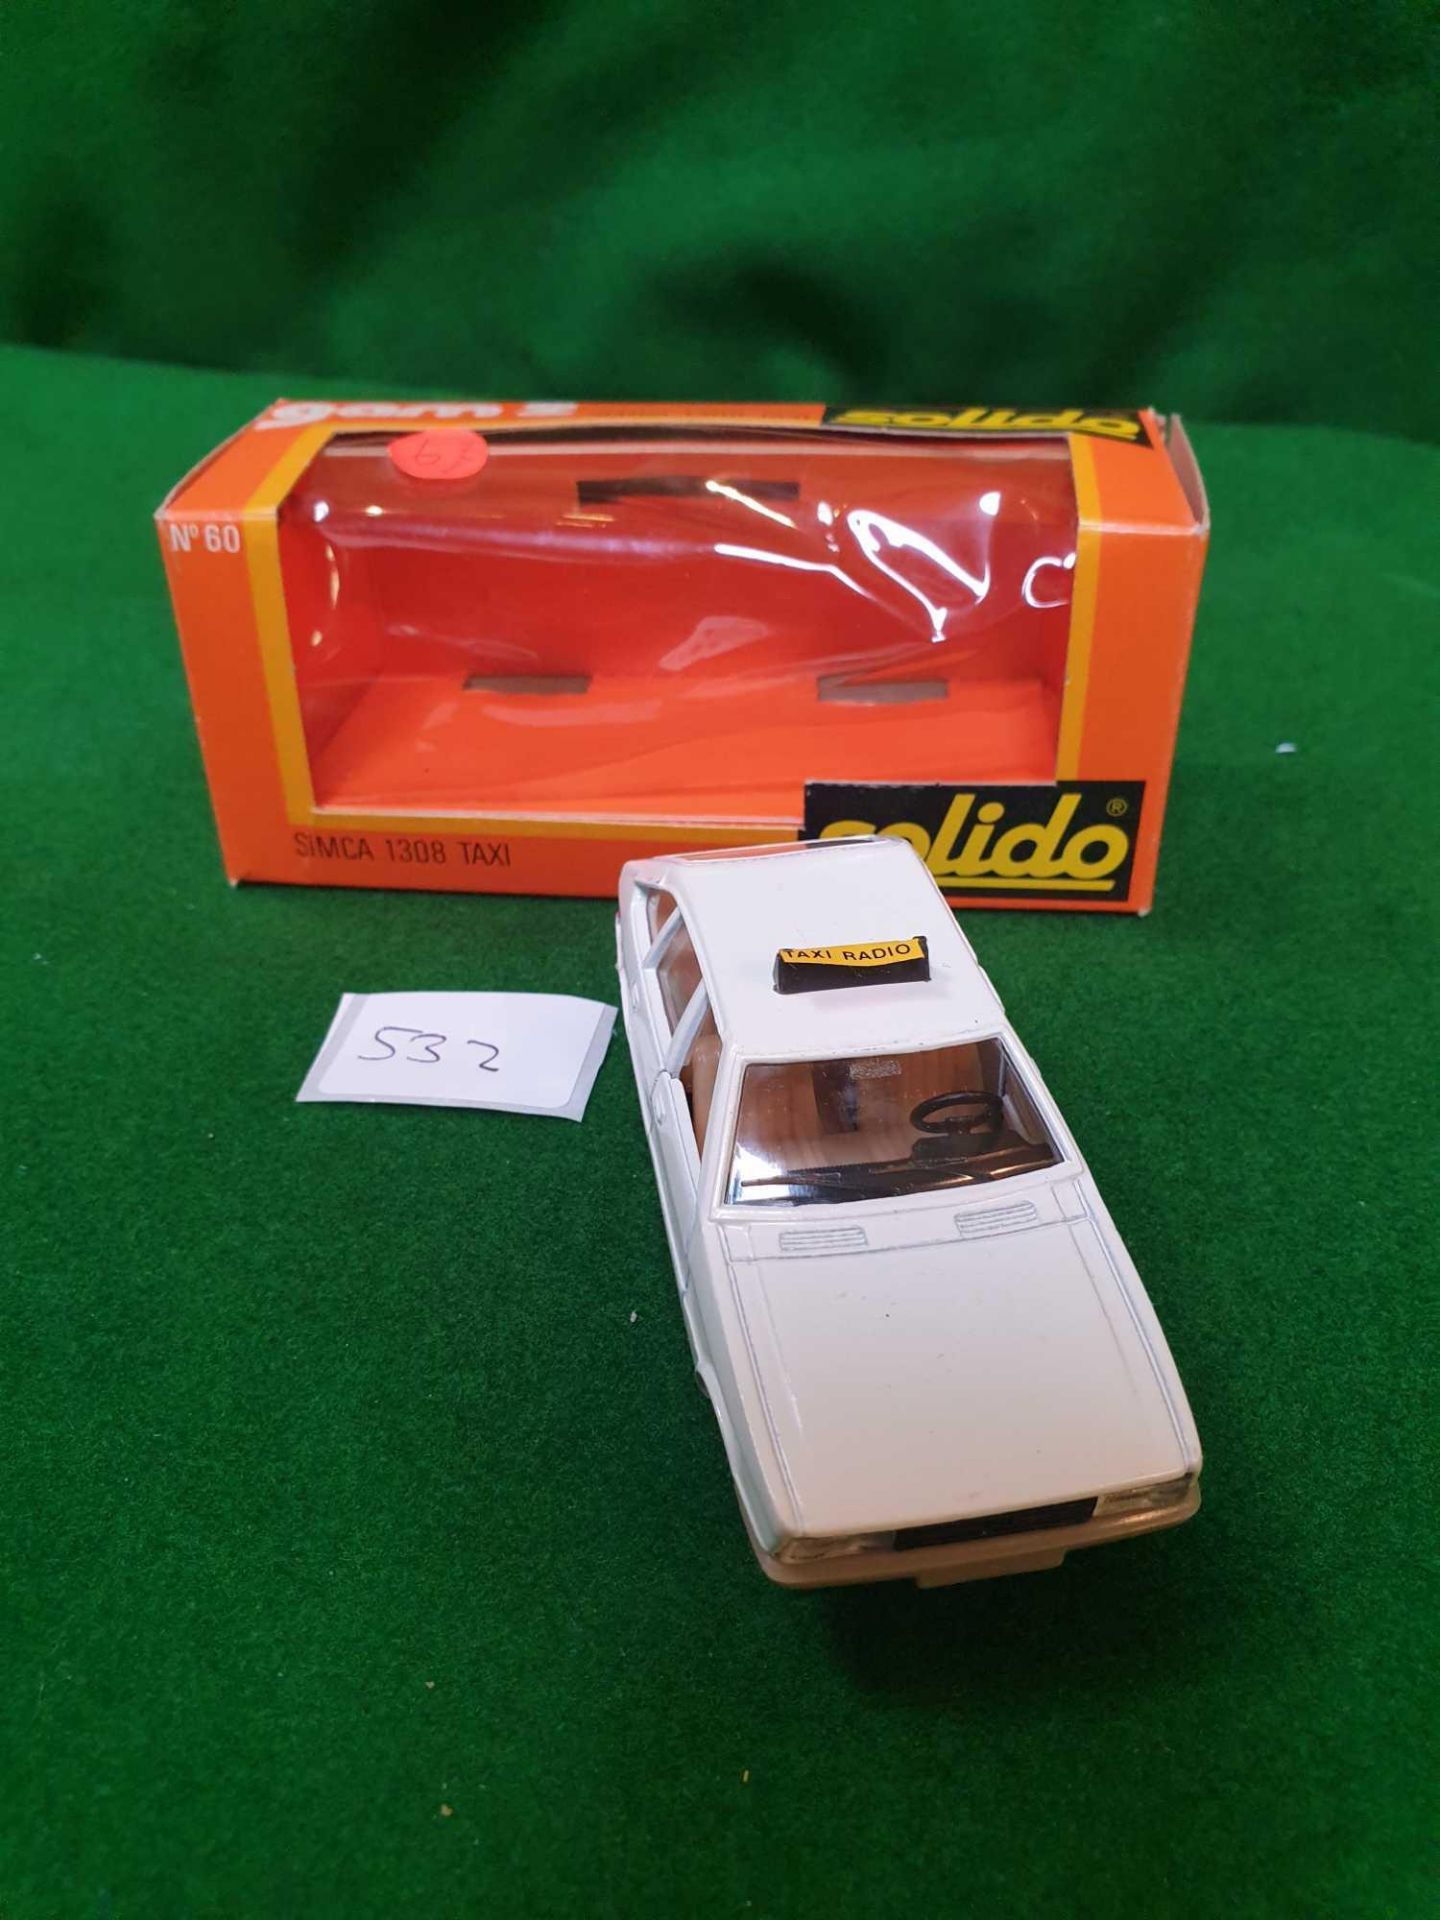 Solido Gam 2 #60 Simca 1308 Taxi White Virtually Mint To Mint Model In A Good Box - Image 3 of 3